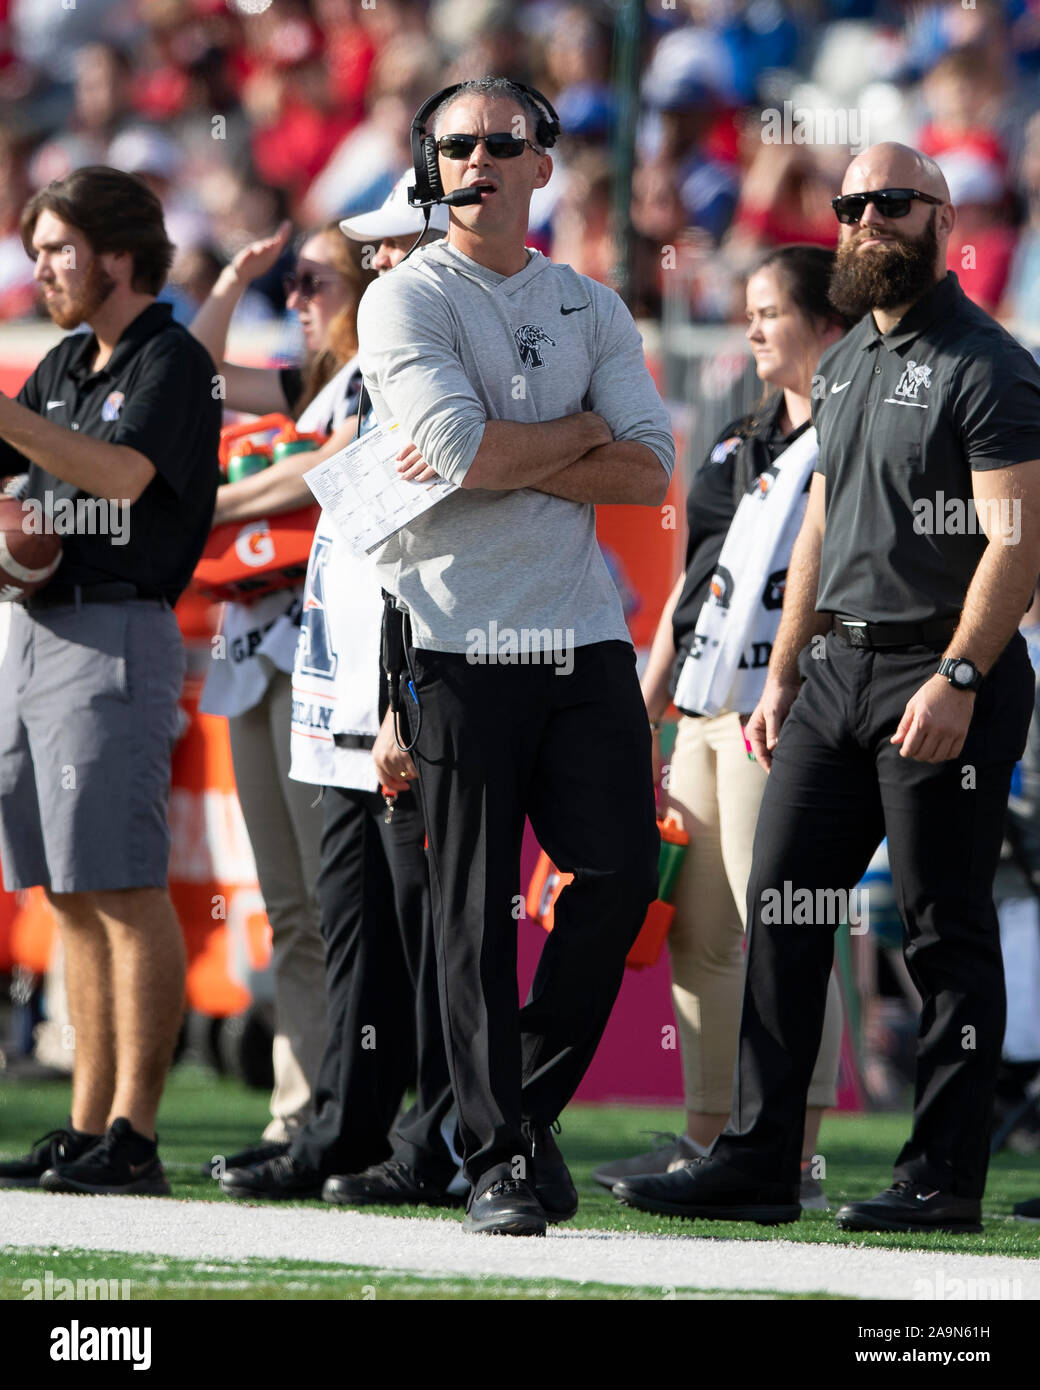 Houston, Texas, USA. 16th Nov, 2019. Memphis Tigers head coach Mike Norvell on the sidelines during a regular season game against the Houston Cougars at TDECU Stadium in Houston, Texas. © Maria Lysaker/DCTF. Credit: csm/Alamy Live News Stock Photo